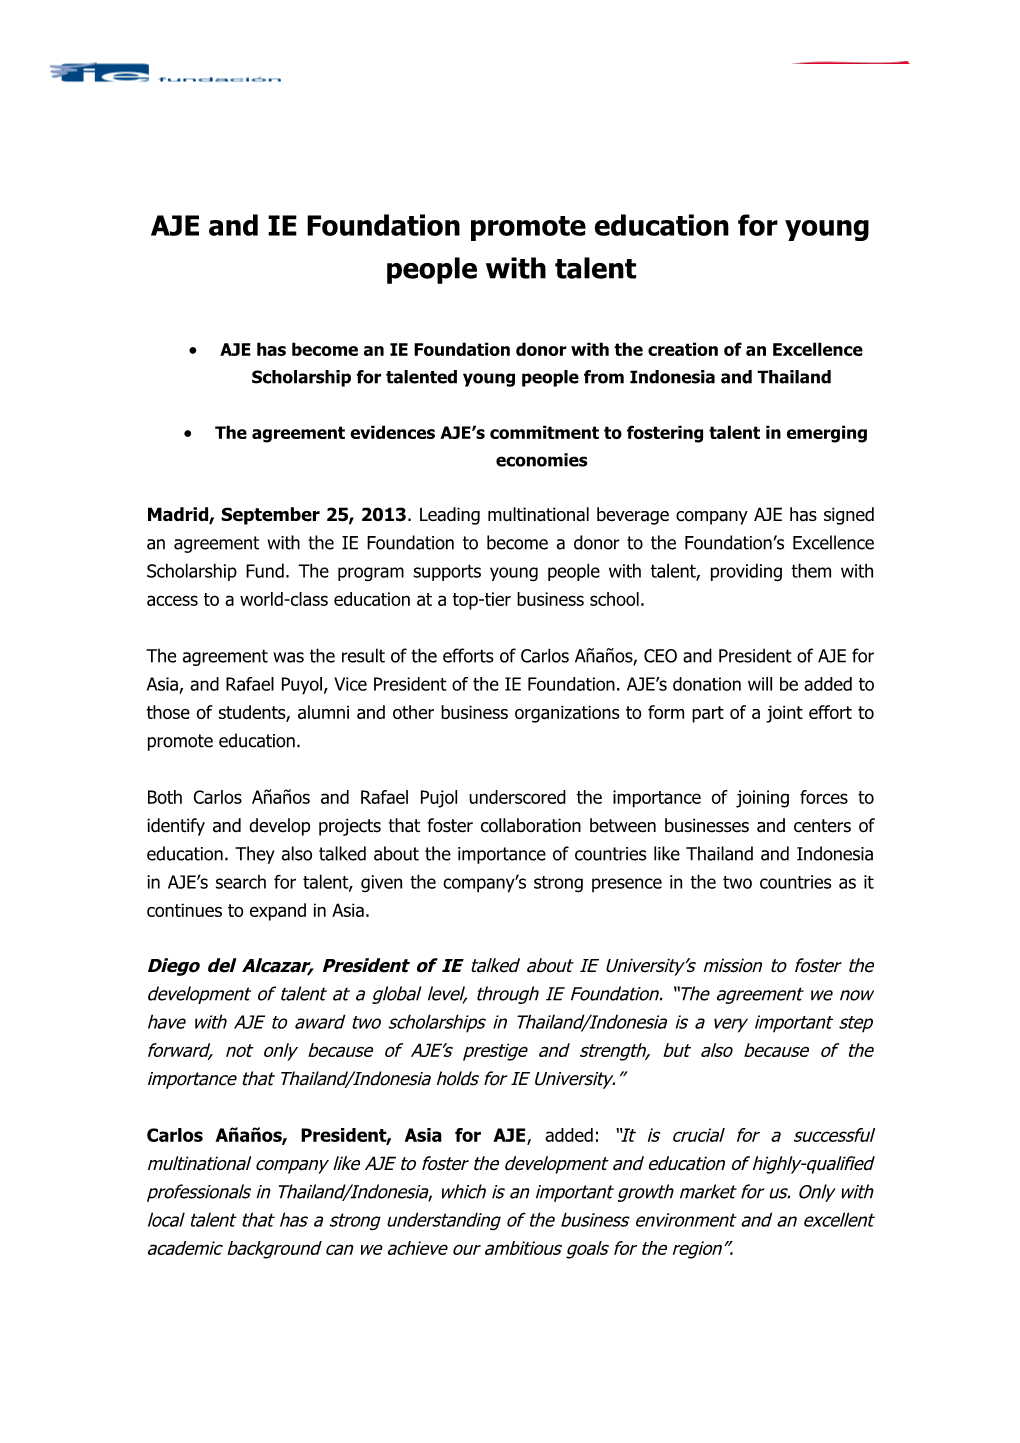 AJE and IE Foundationpromote Education for Young People with Talent